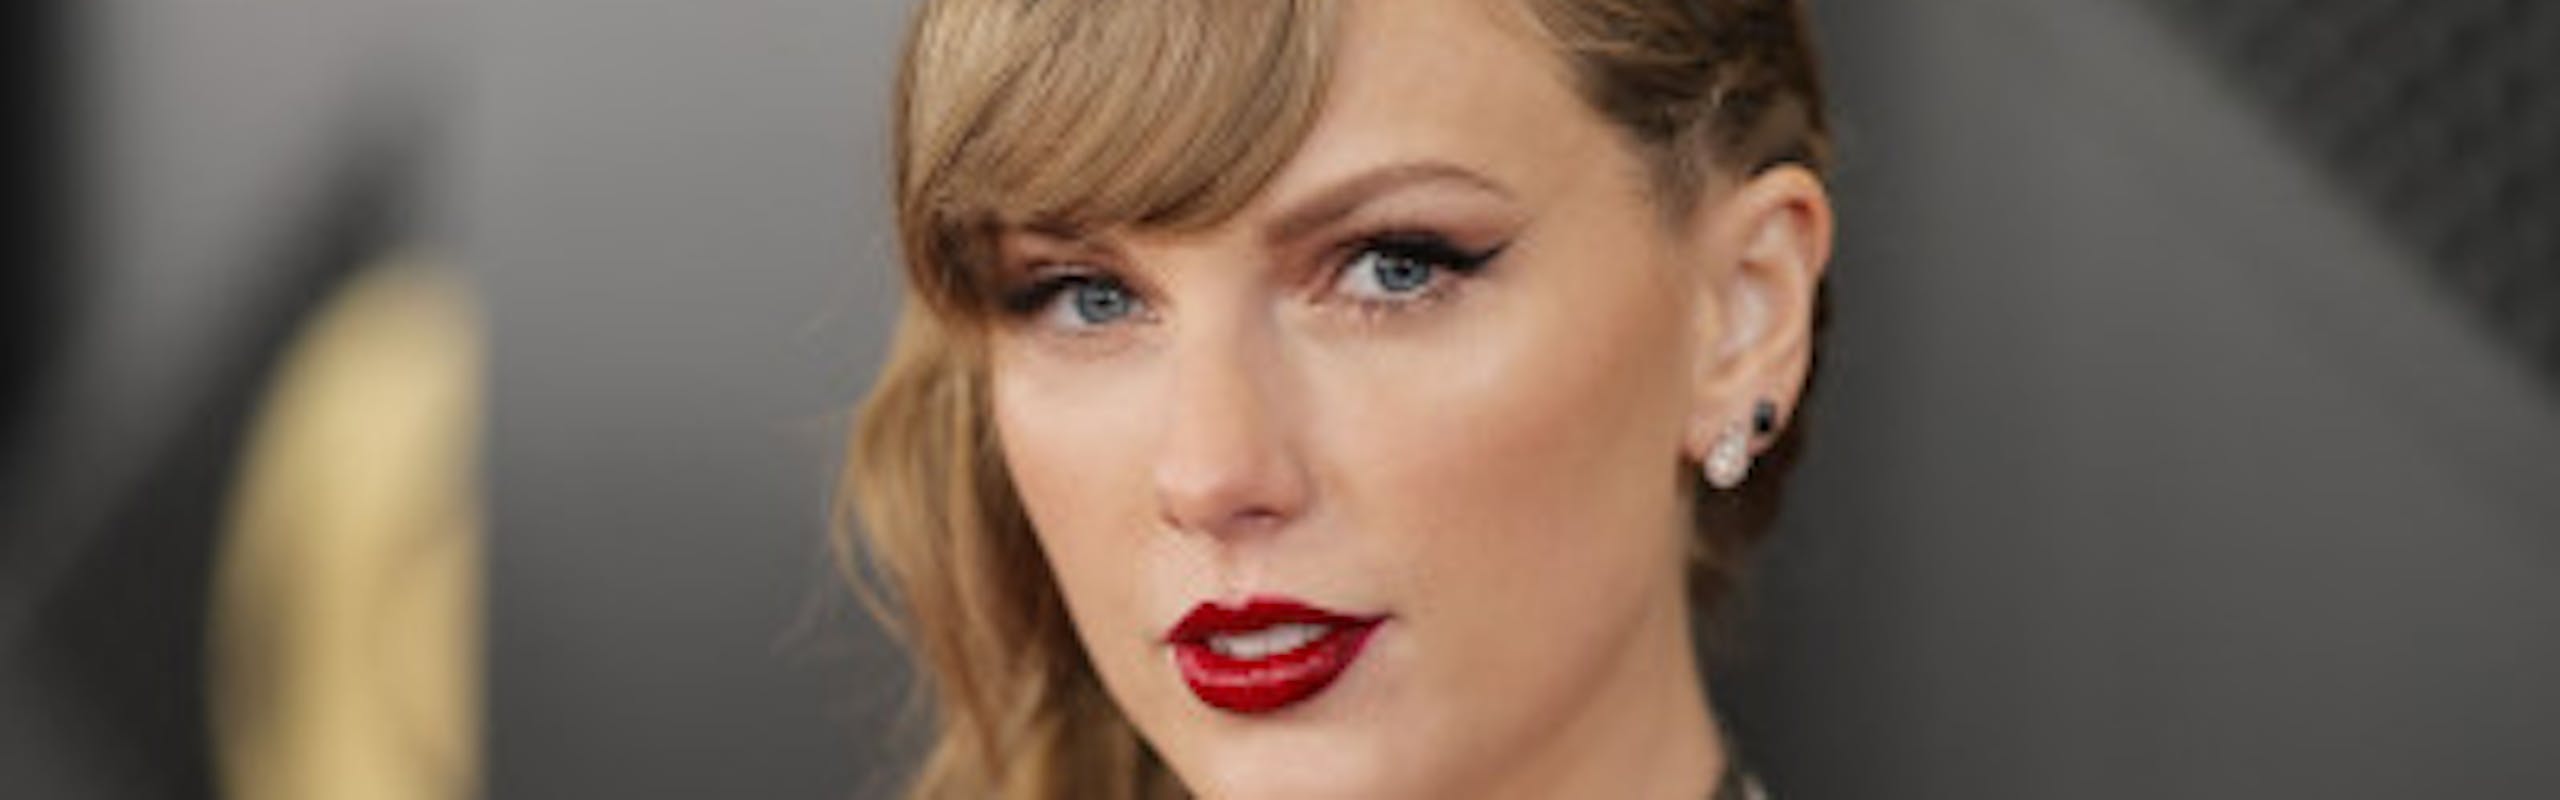 Taylor Swift - Foto: Getty Images